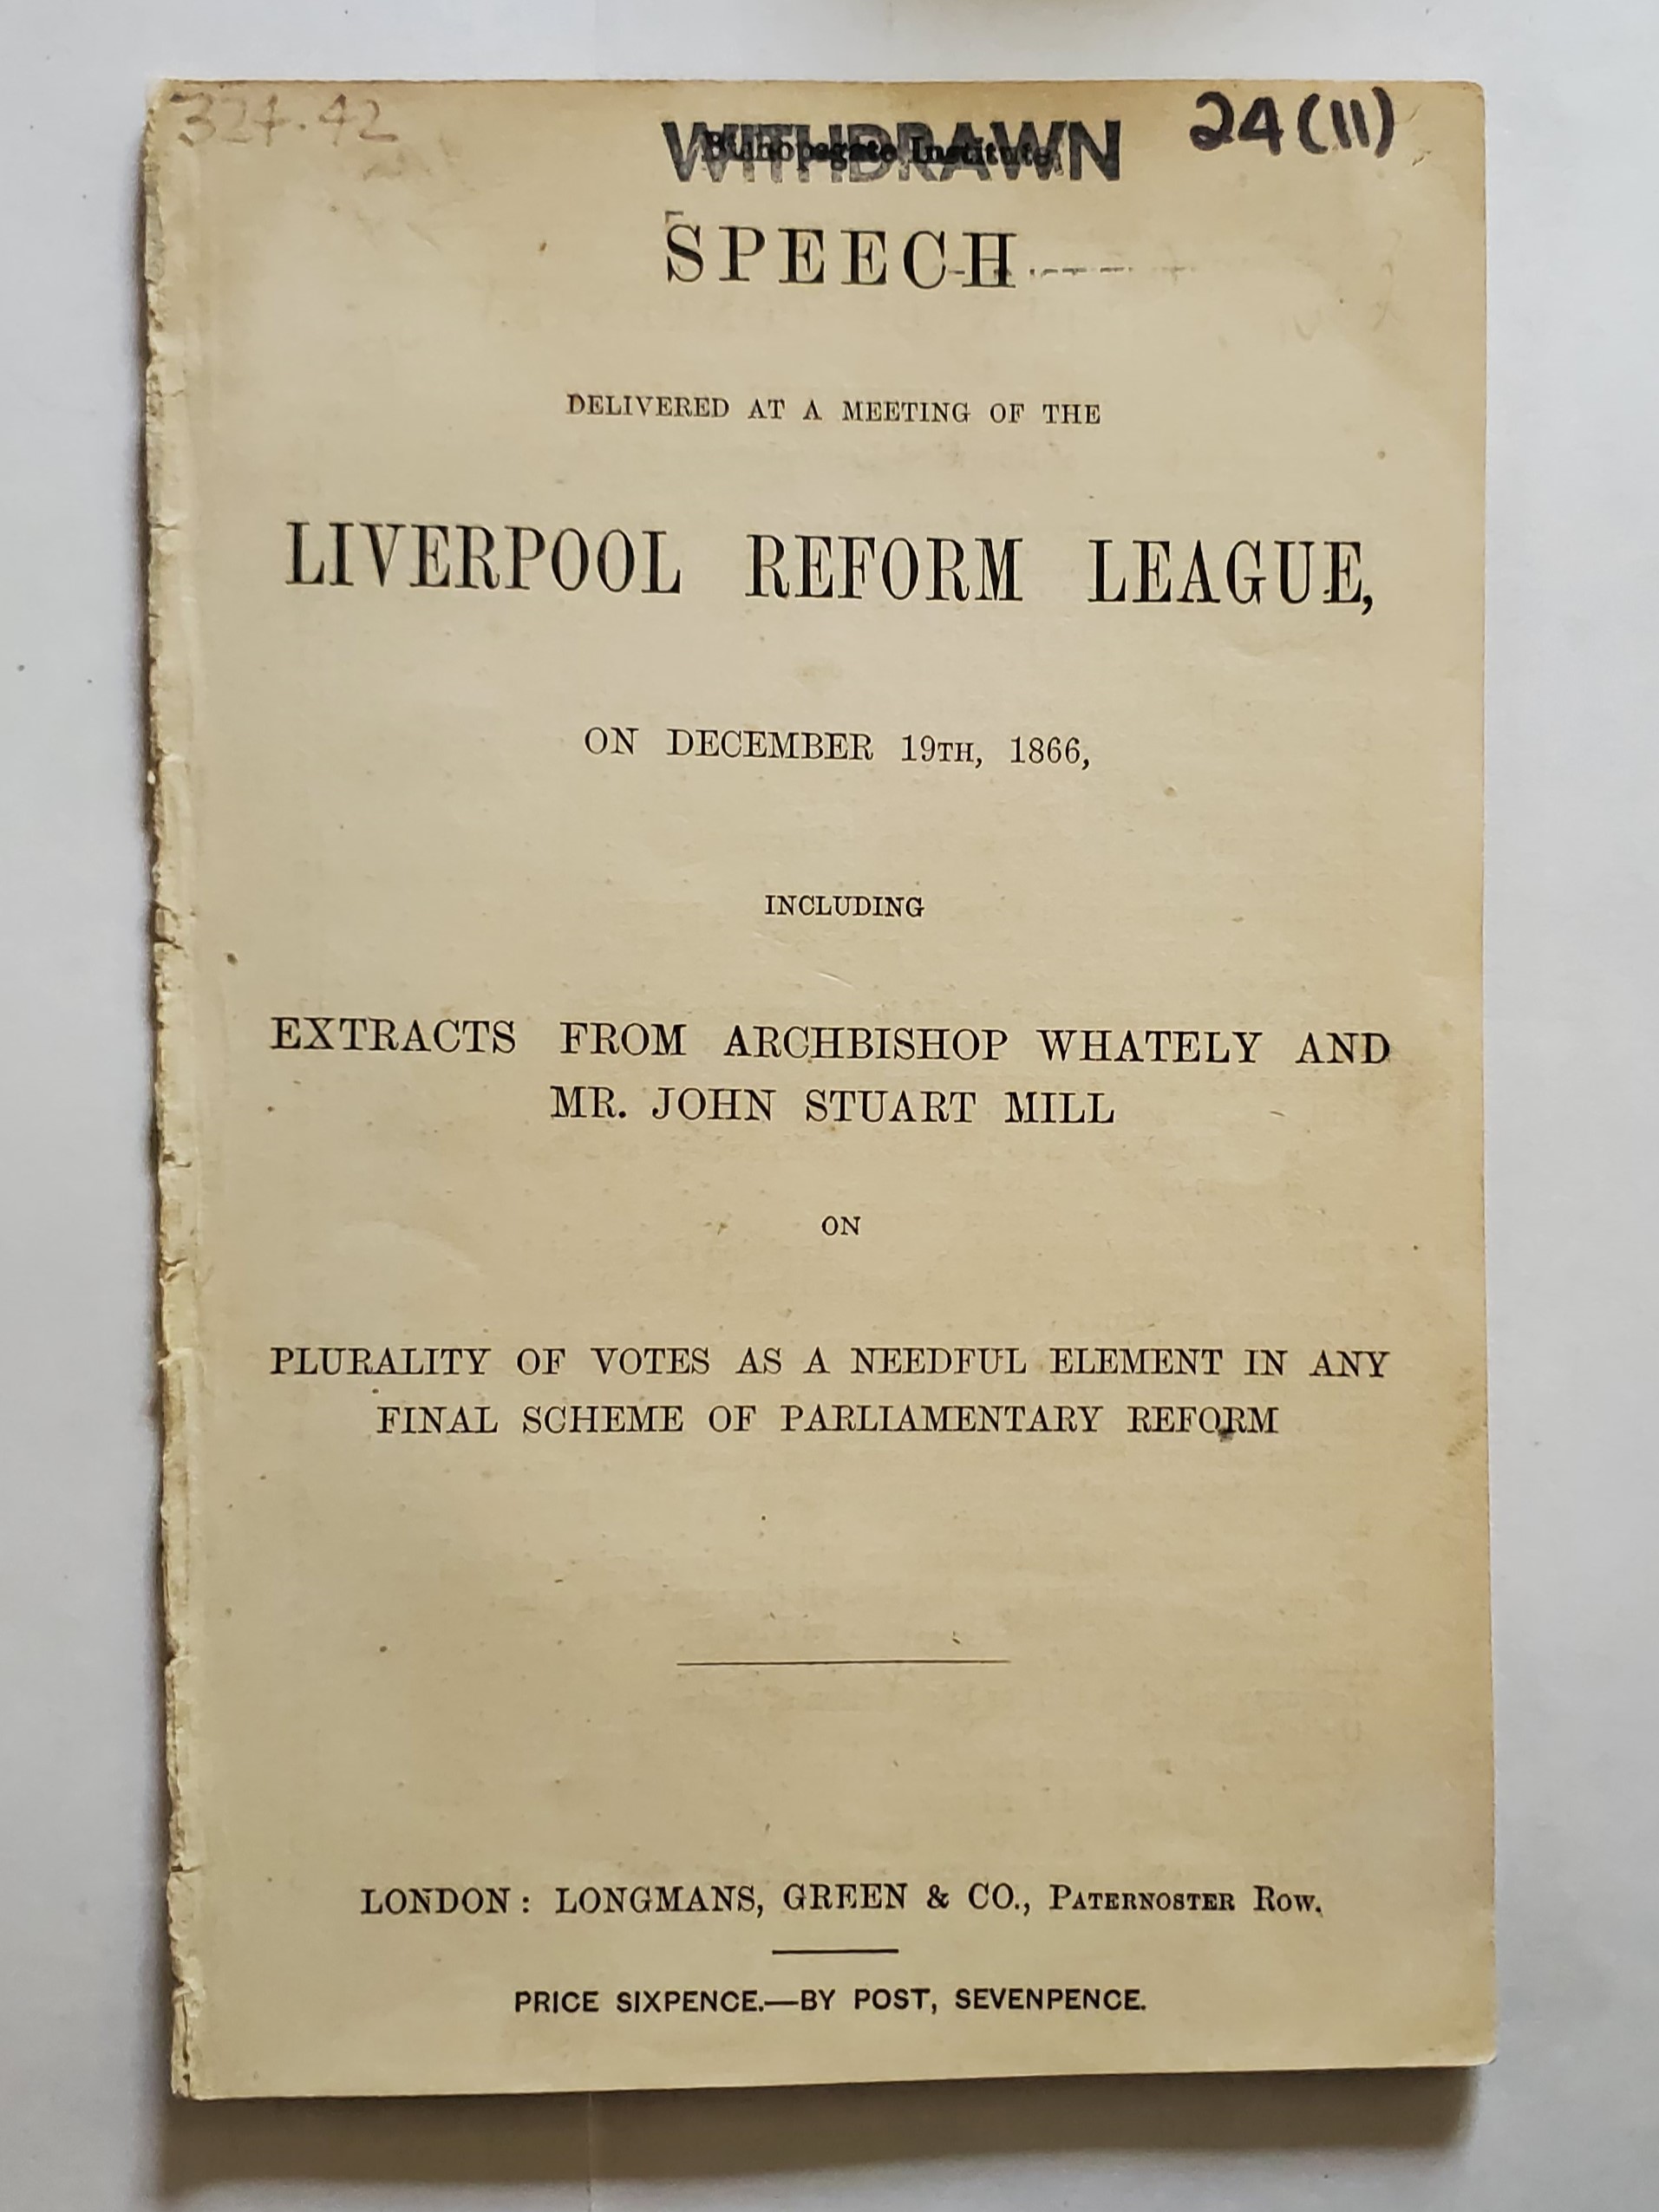 Robert Andrew MACFIE. Speech delivered at a meeting of the Liverpool Reform League